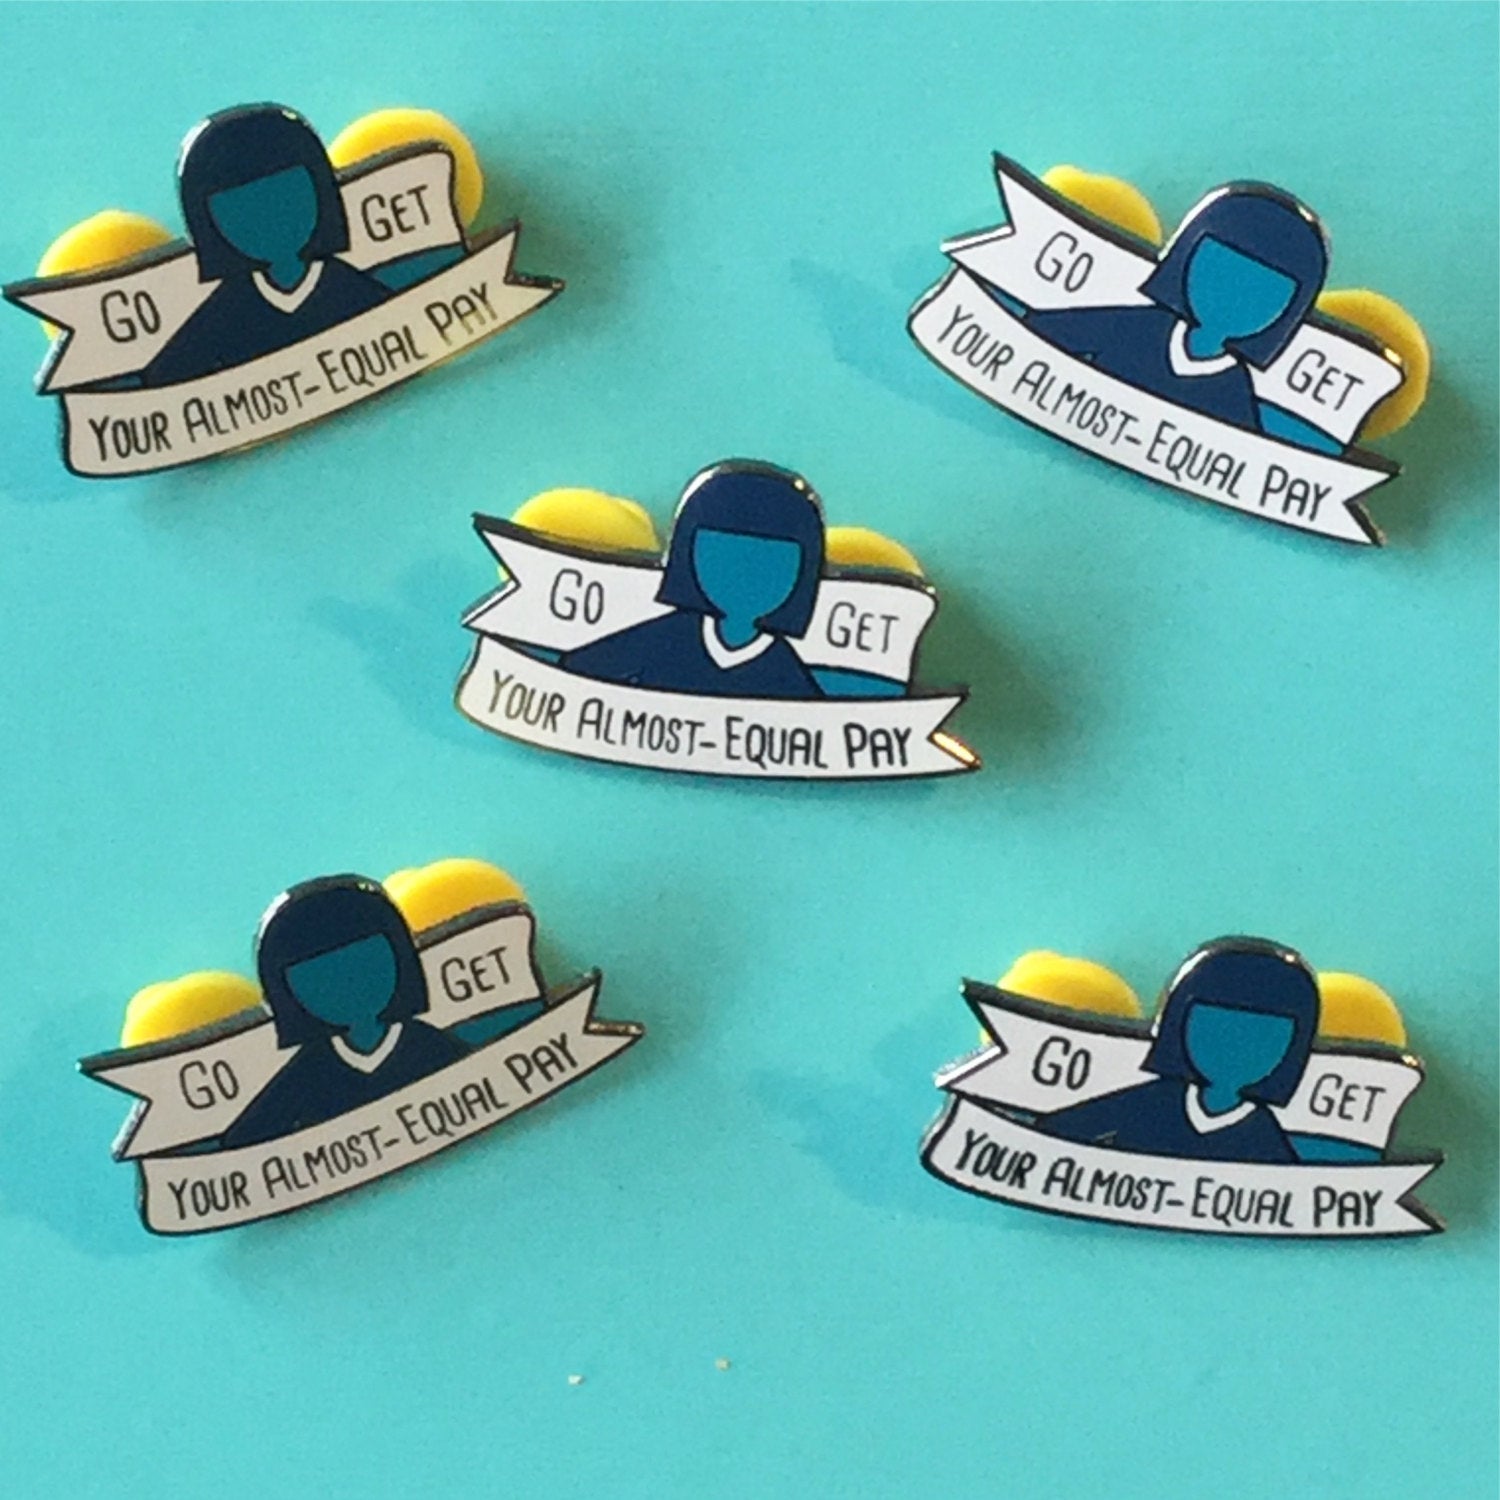 Enamel Pin: Go Get Your Almost Equal Pay